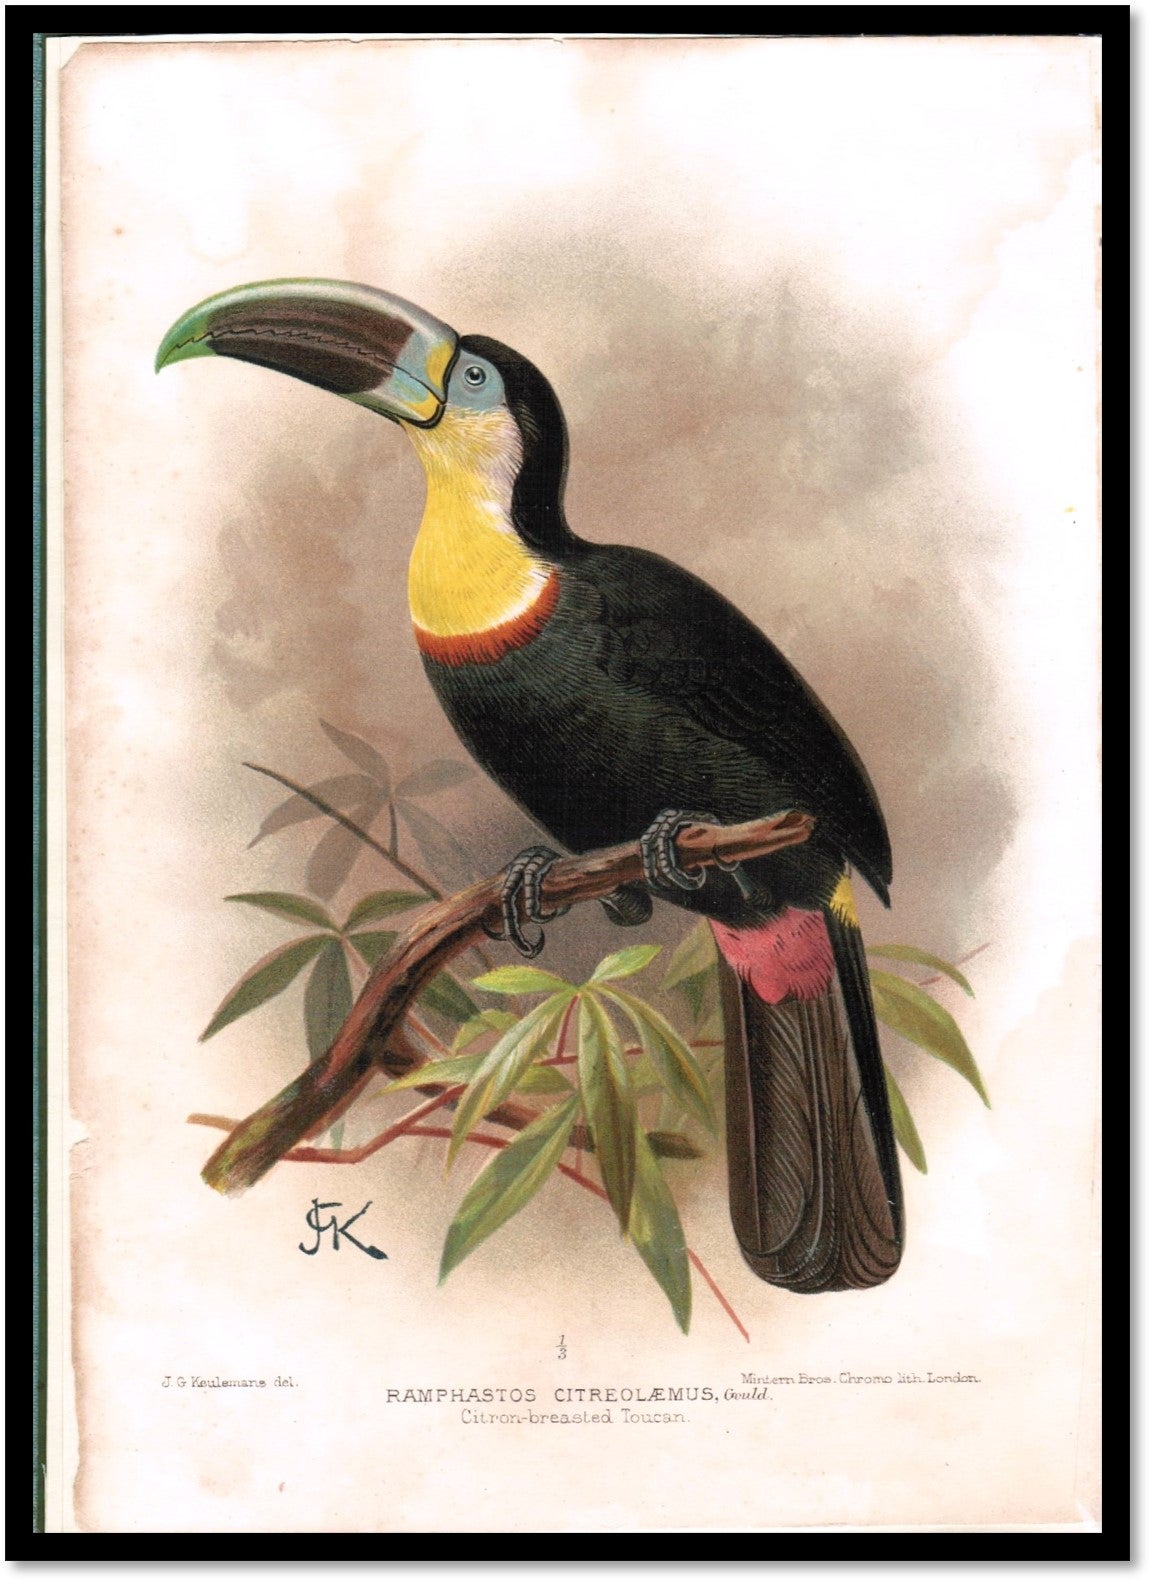 A Flying Trip to the Tropics: A Record of an Ornithological Visit to the United States of Colombia, South America and to the Island of Curacao, West Indies in the Year 1892